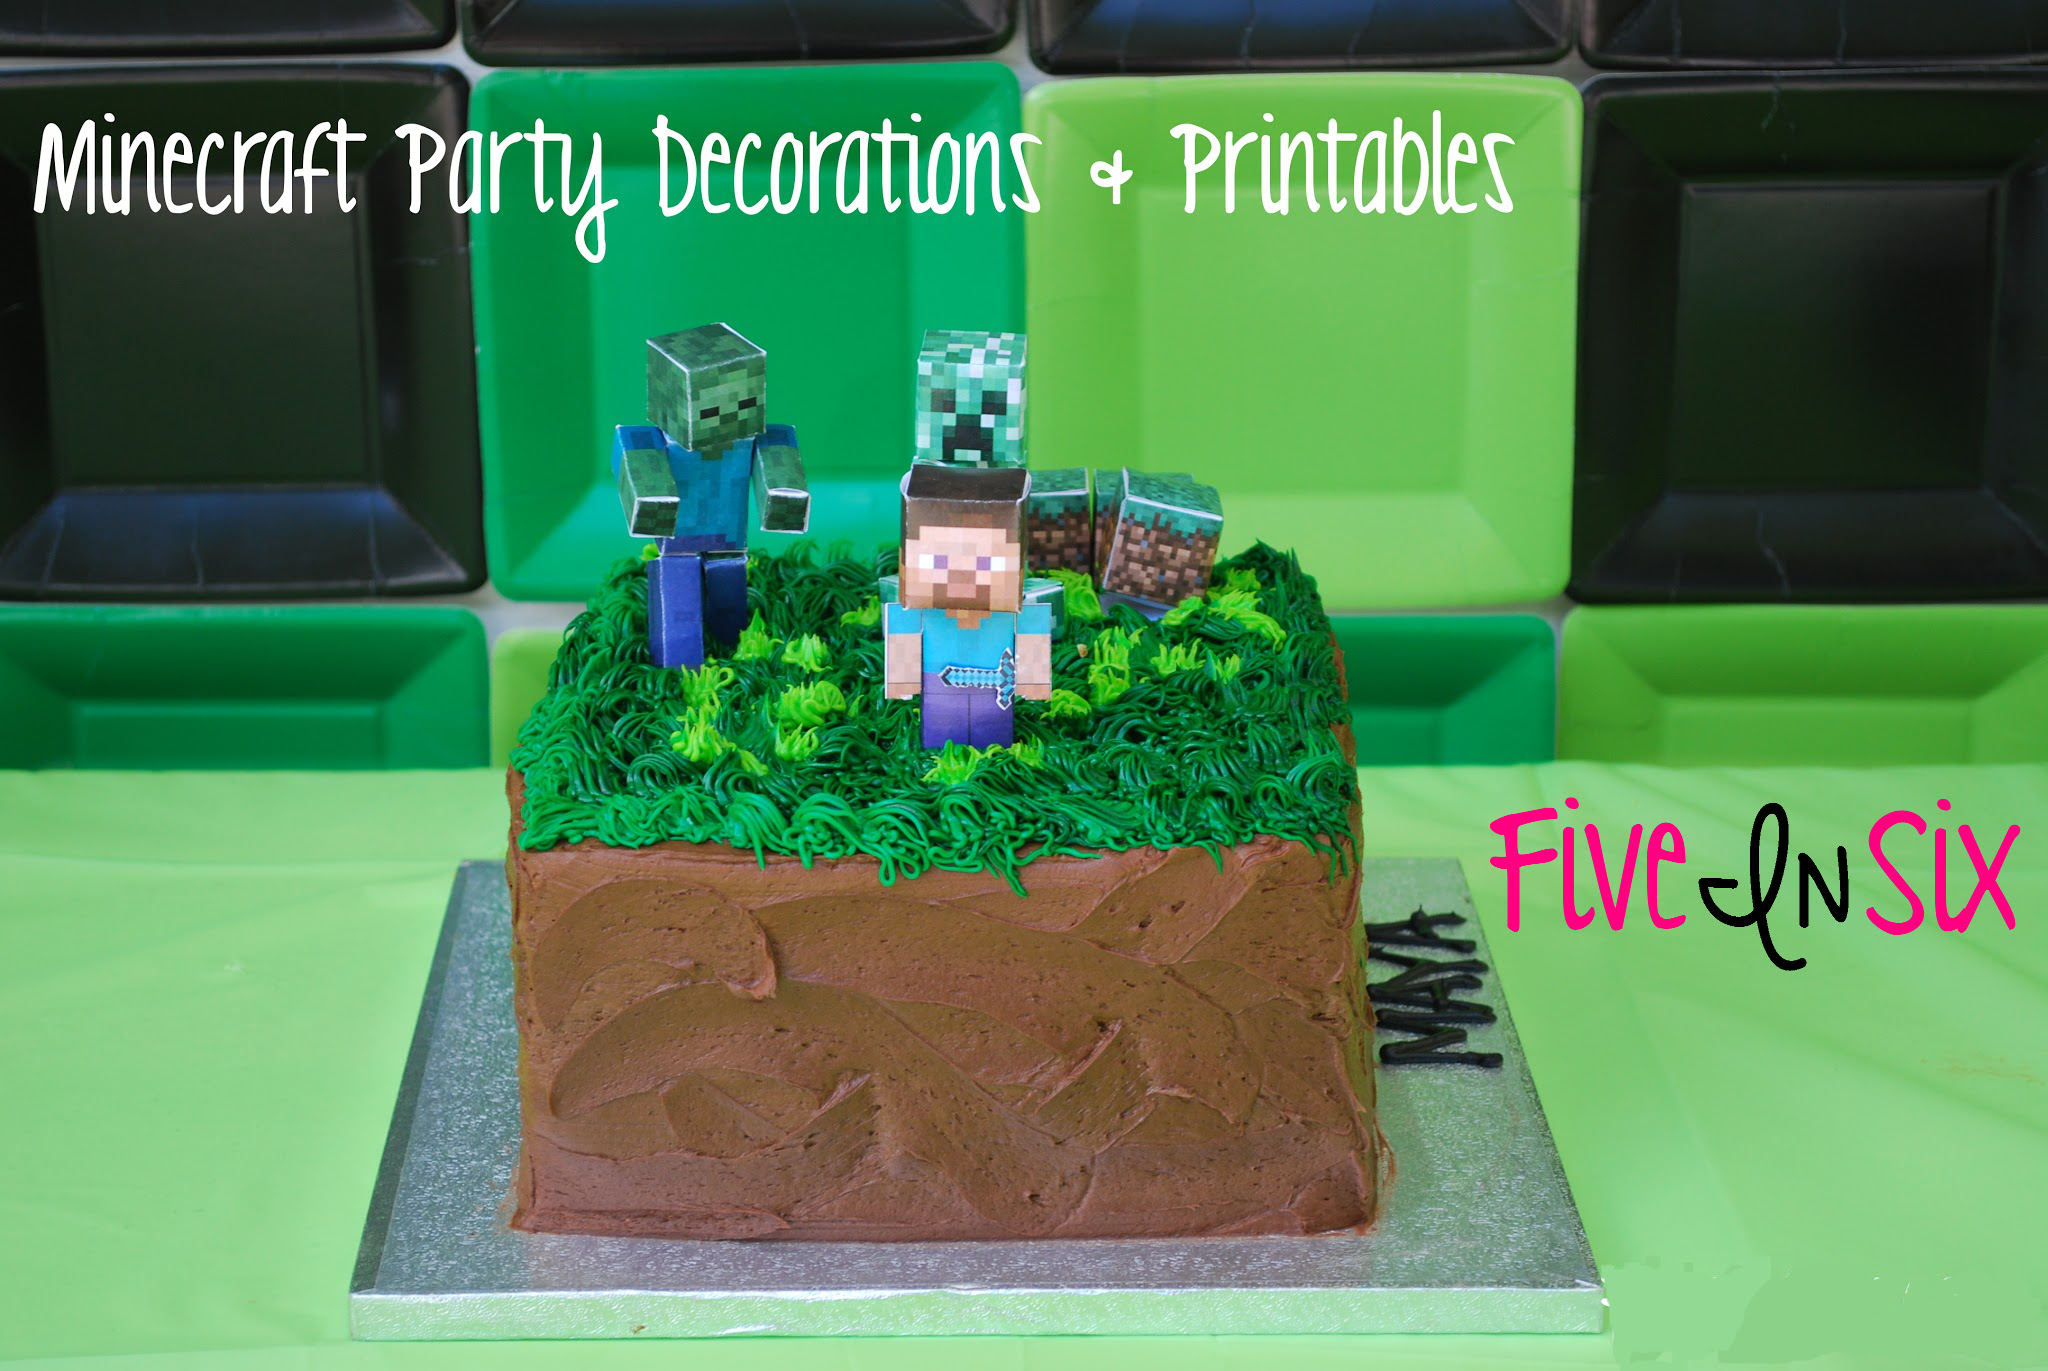 Minecraft Party Decoration Ideas and Downloadable Printables